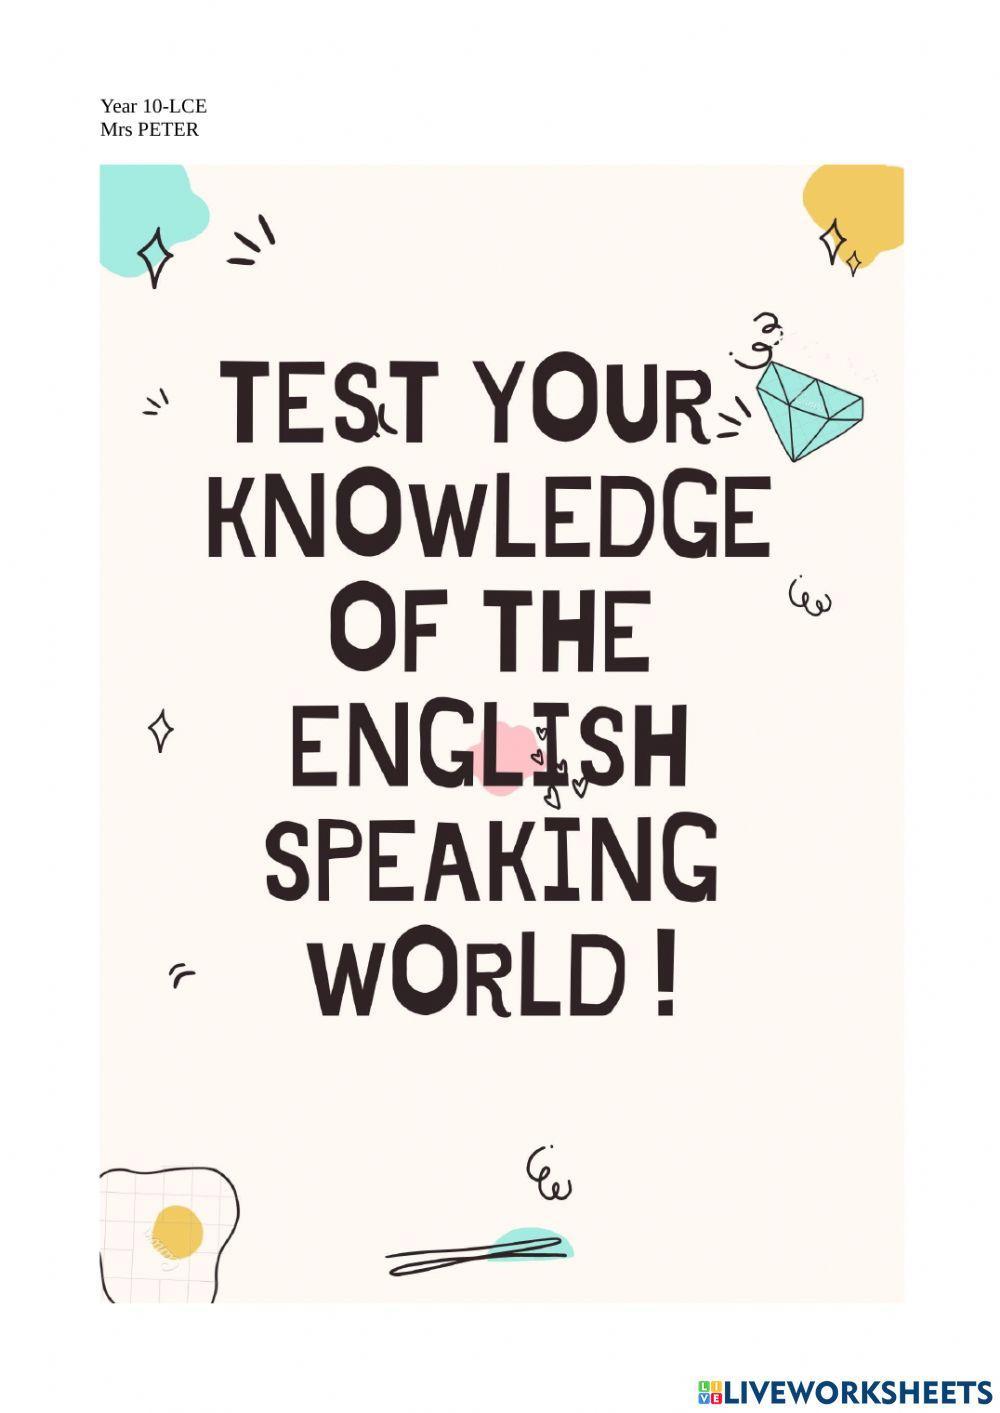 Test your knowledge of the English Speaking world